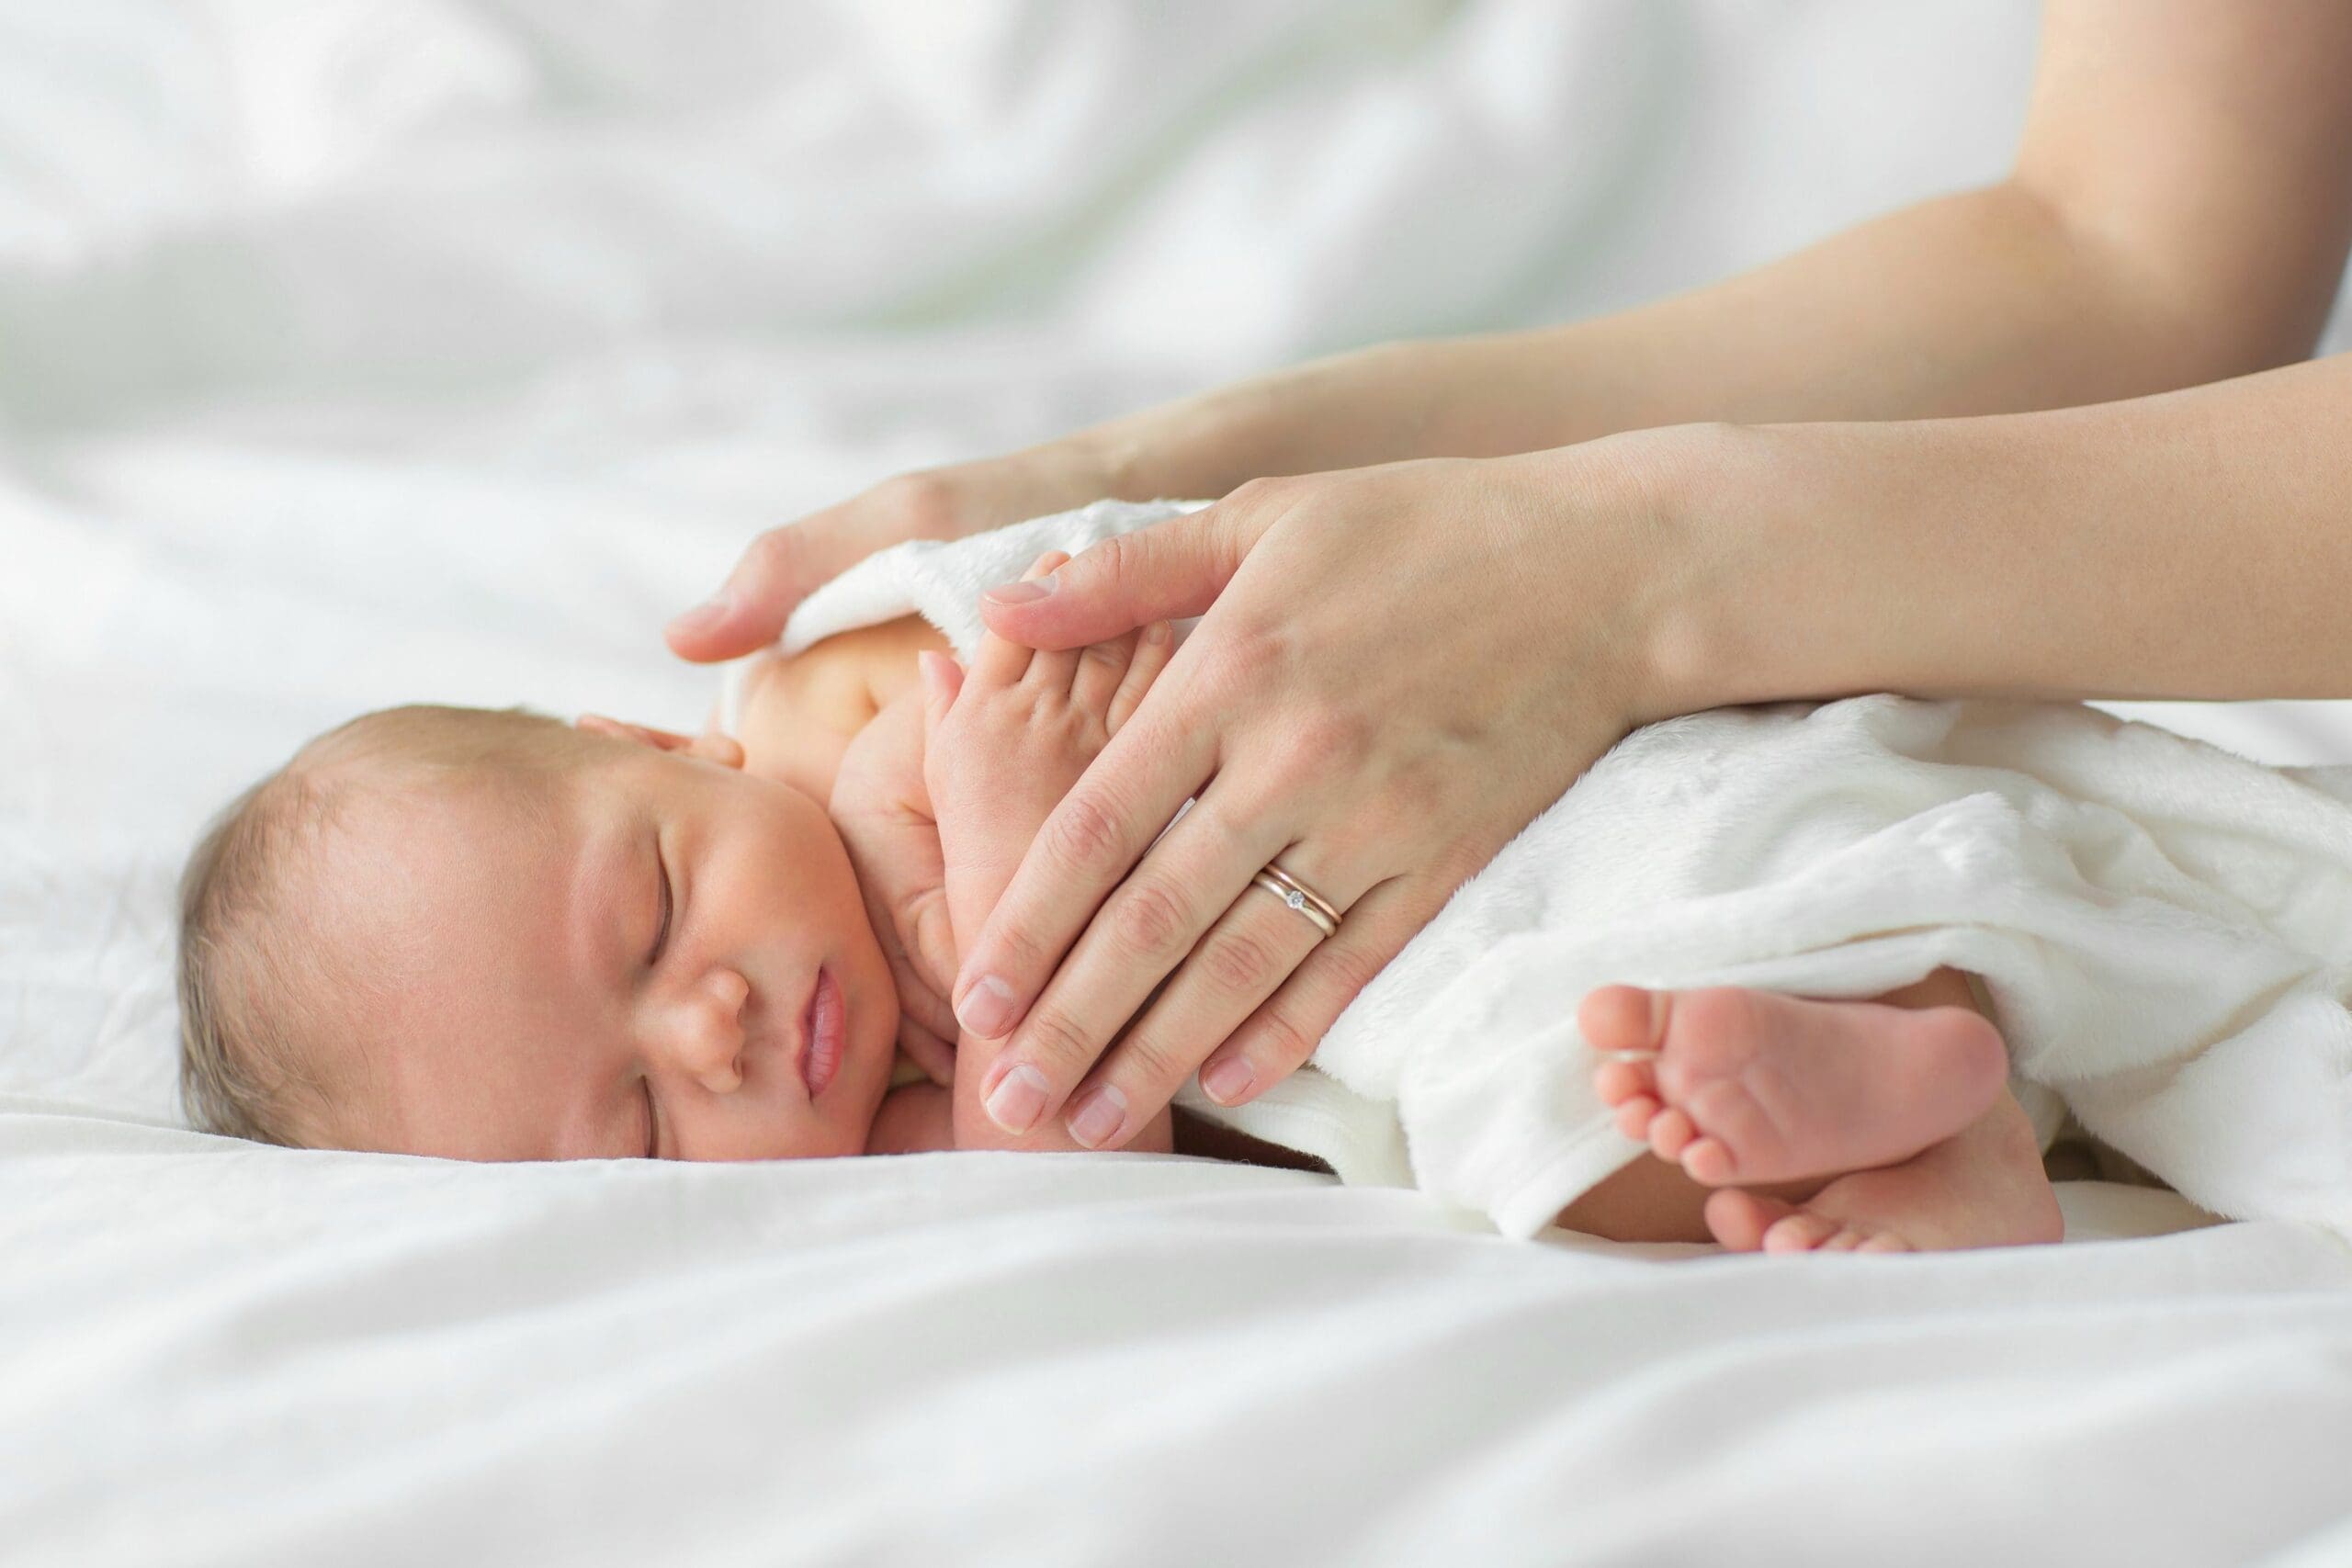 Can stroking a baby help it feel less pain?